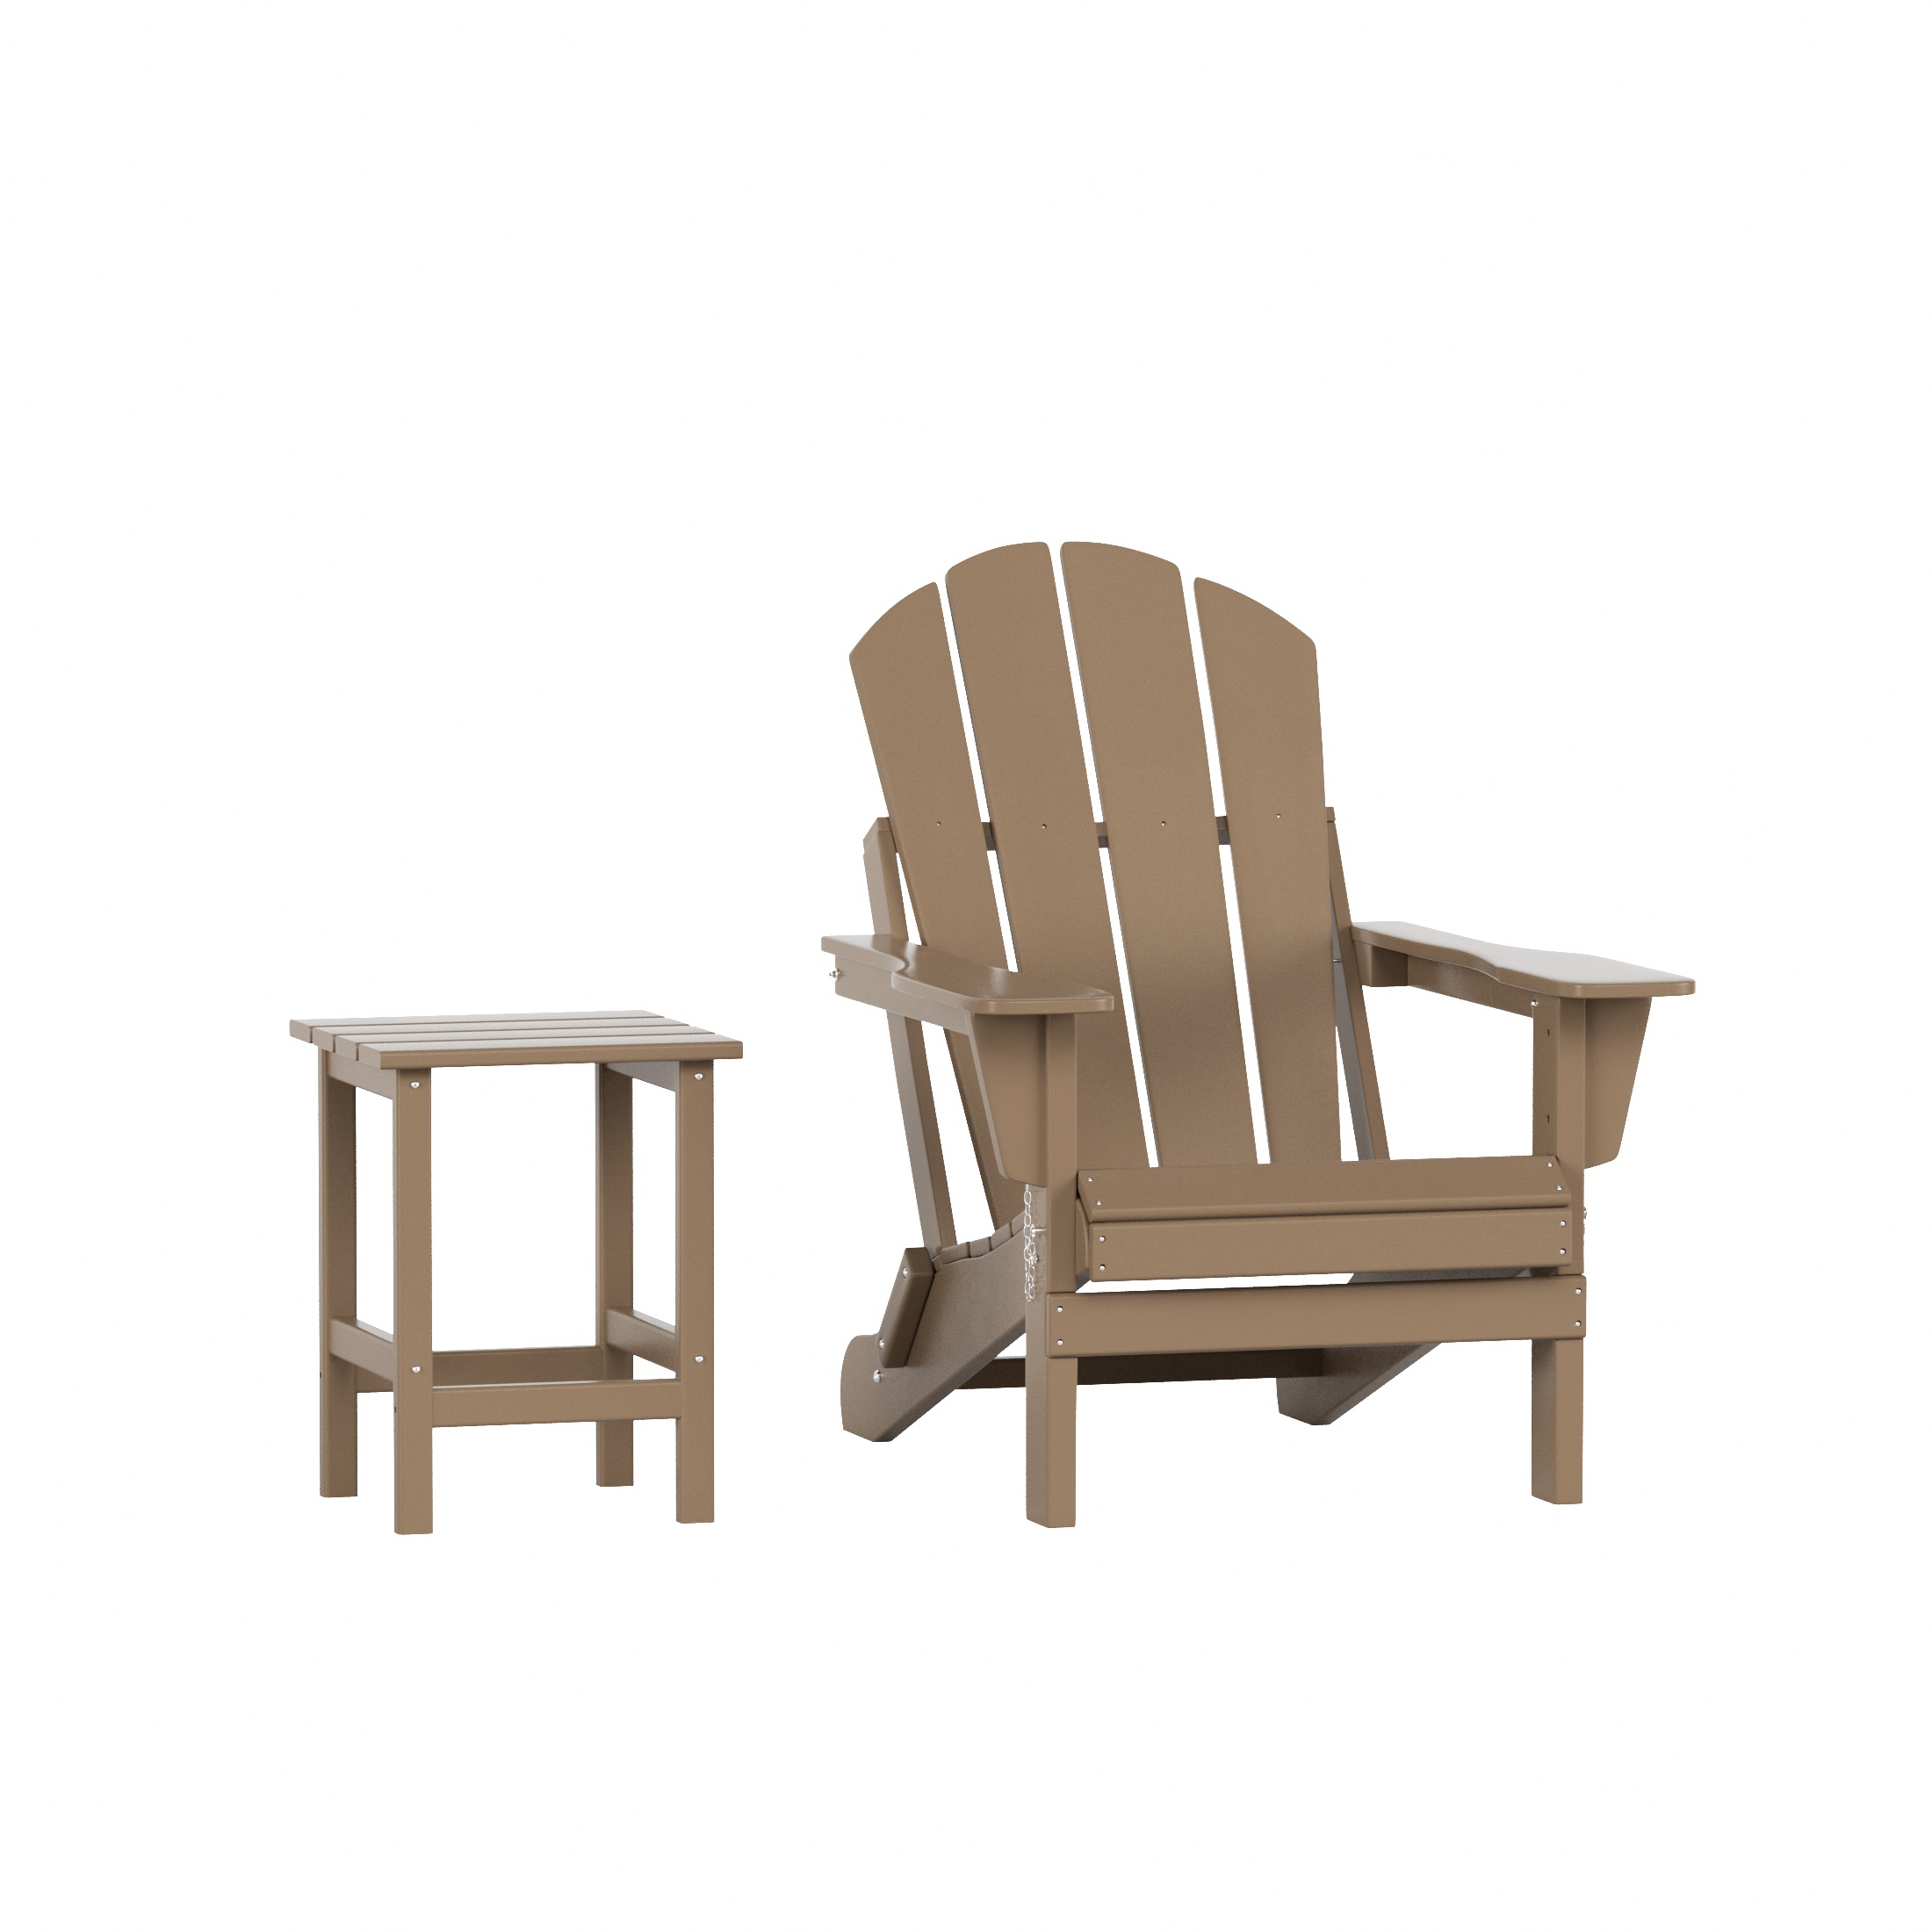 WestinTrends Malibu 2-Pieces Adirondack Chair Set with Side Table, All Weather Outdoor Seating Plastic Patio Lawn Chair Folding for Outside Porch Deck Backyard, Weathered Wood - image 1 of 7